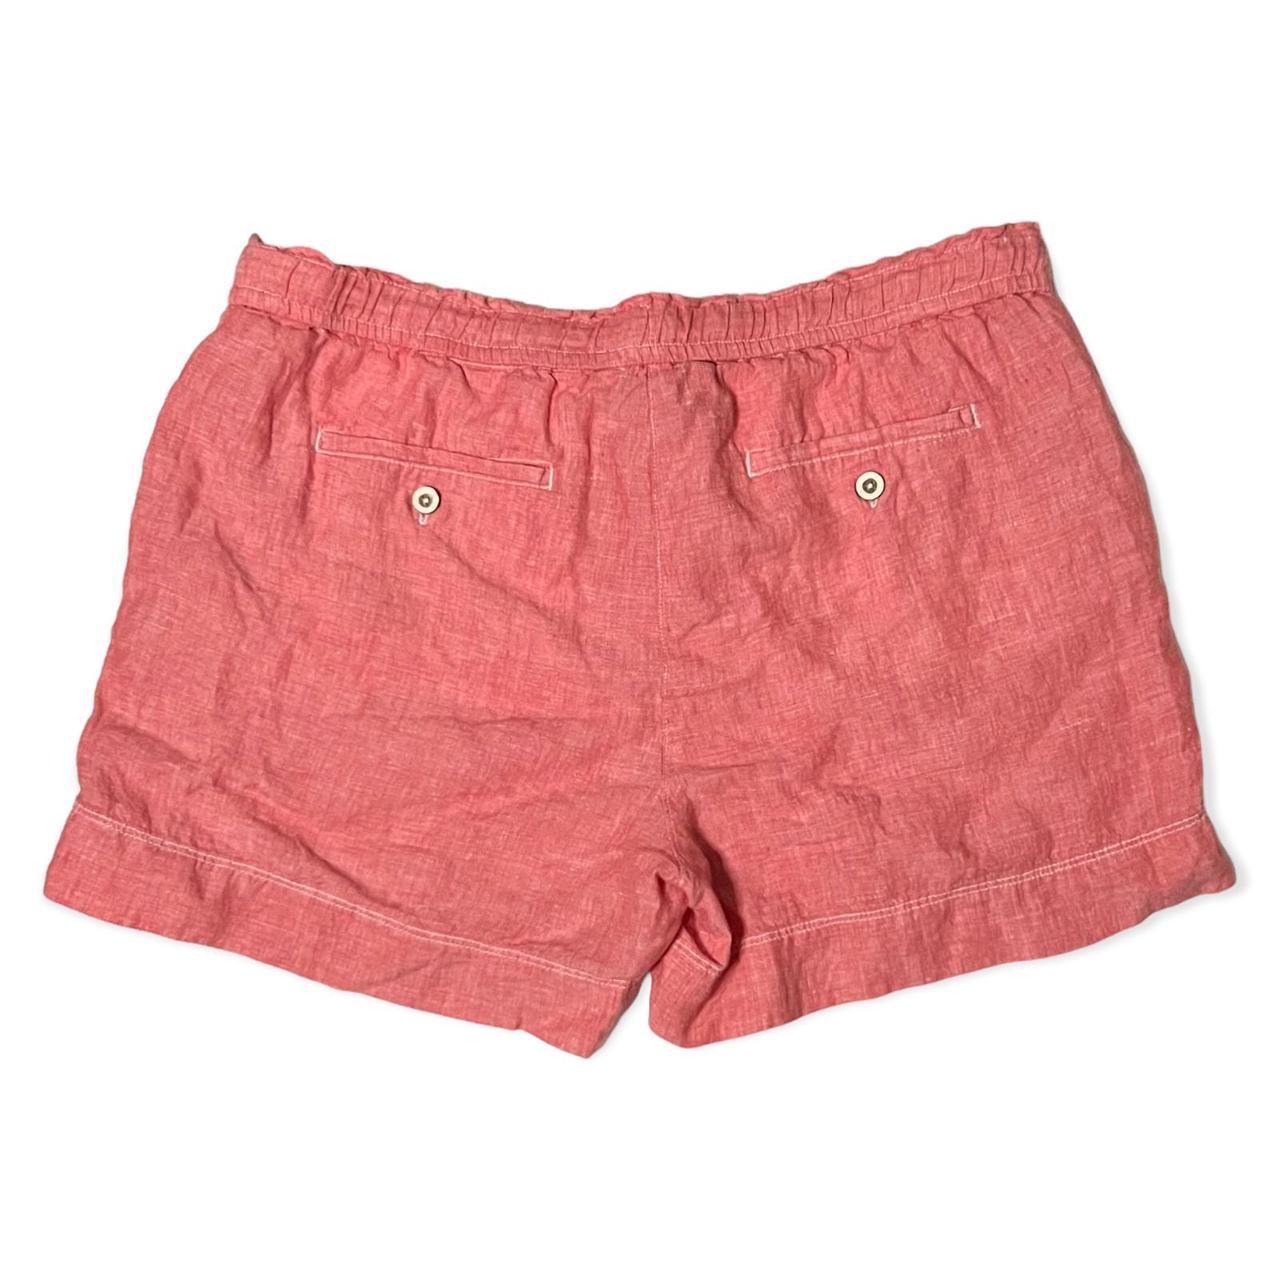 Product Image 2 - Tommy Bahama Women's Coral High-Waist